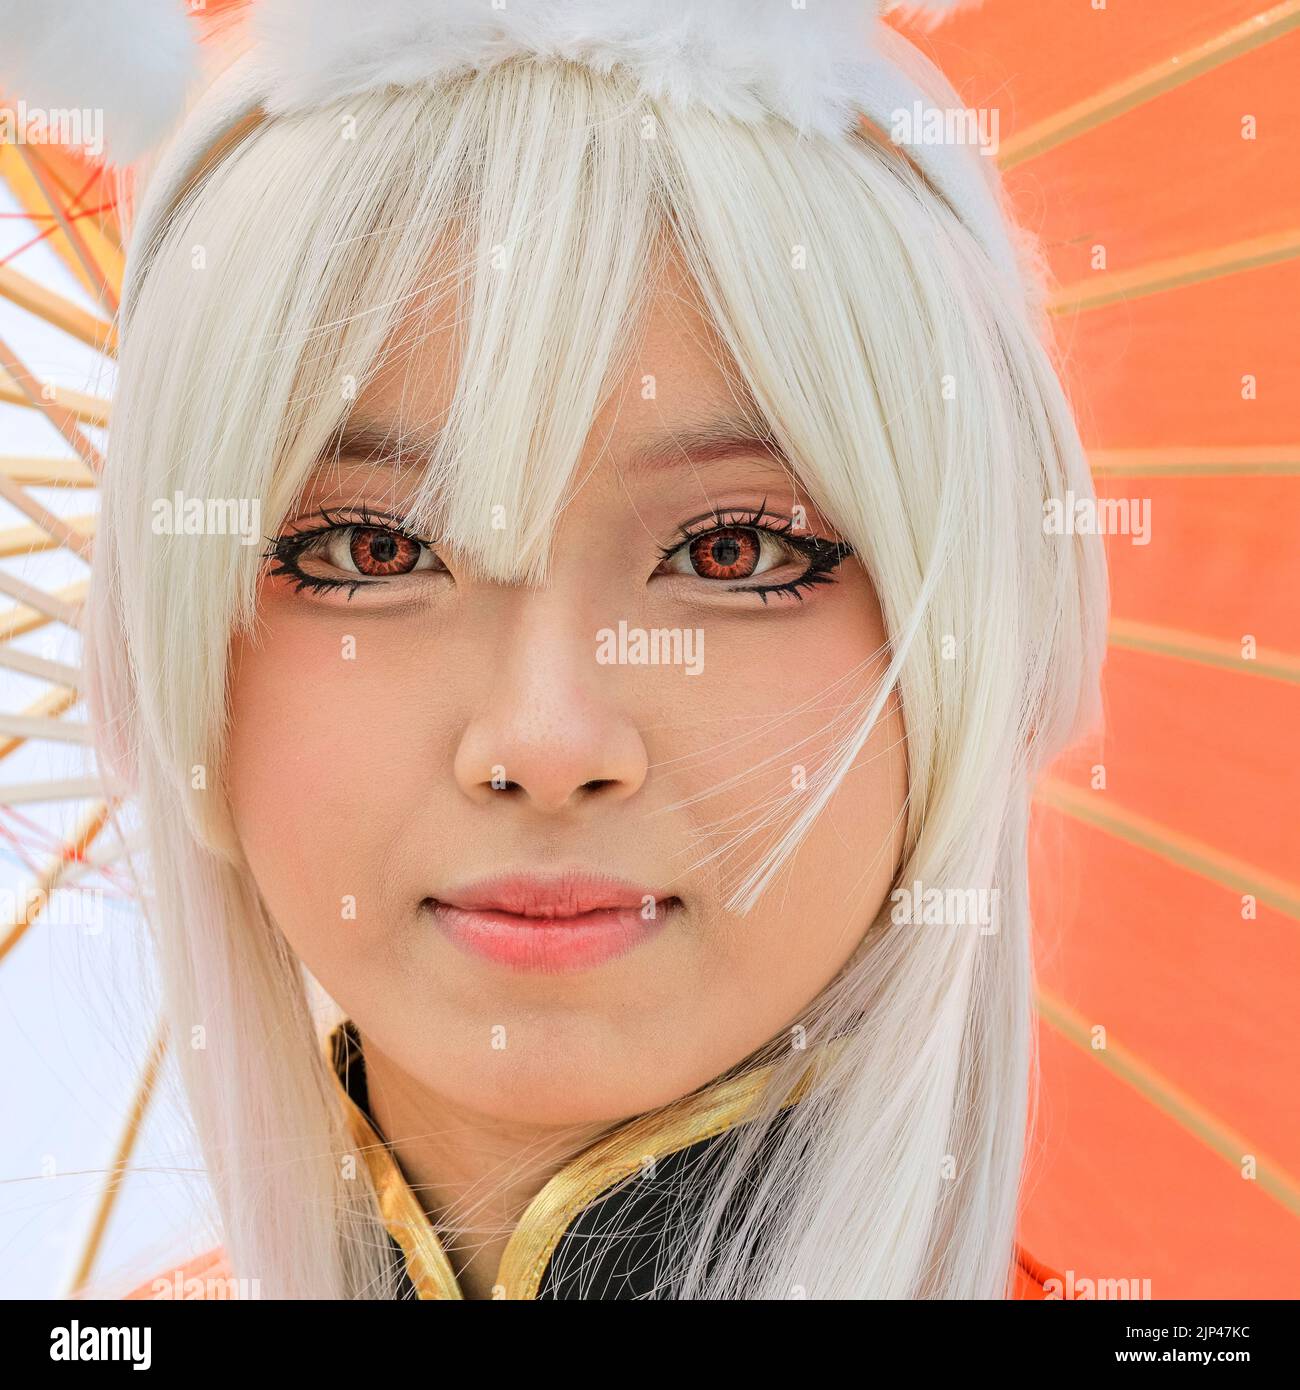 Young Asian womanposes as Gongsun Li, characters from King of Glory (Honor of Kings), a Chinese video game. Stock Photo